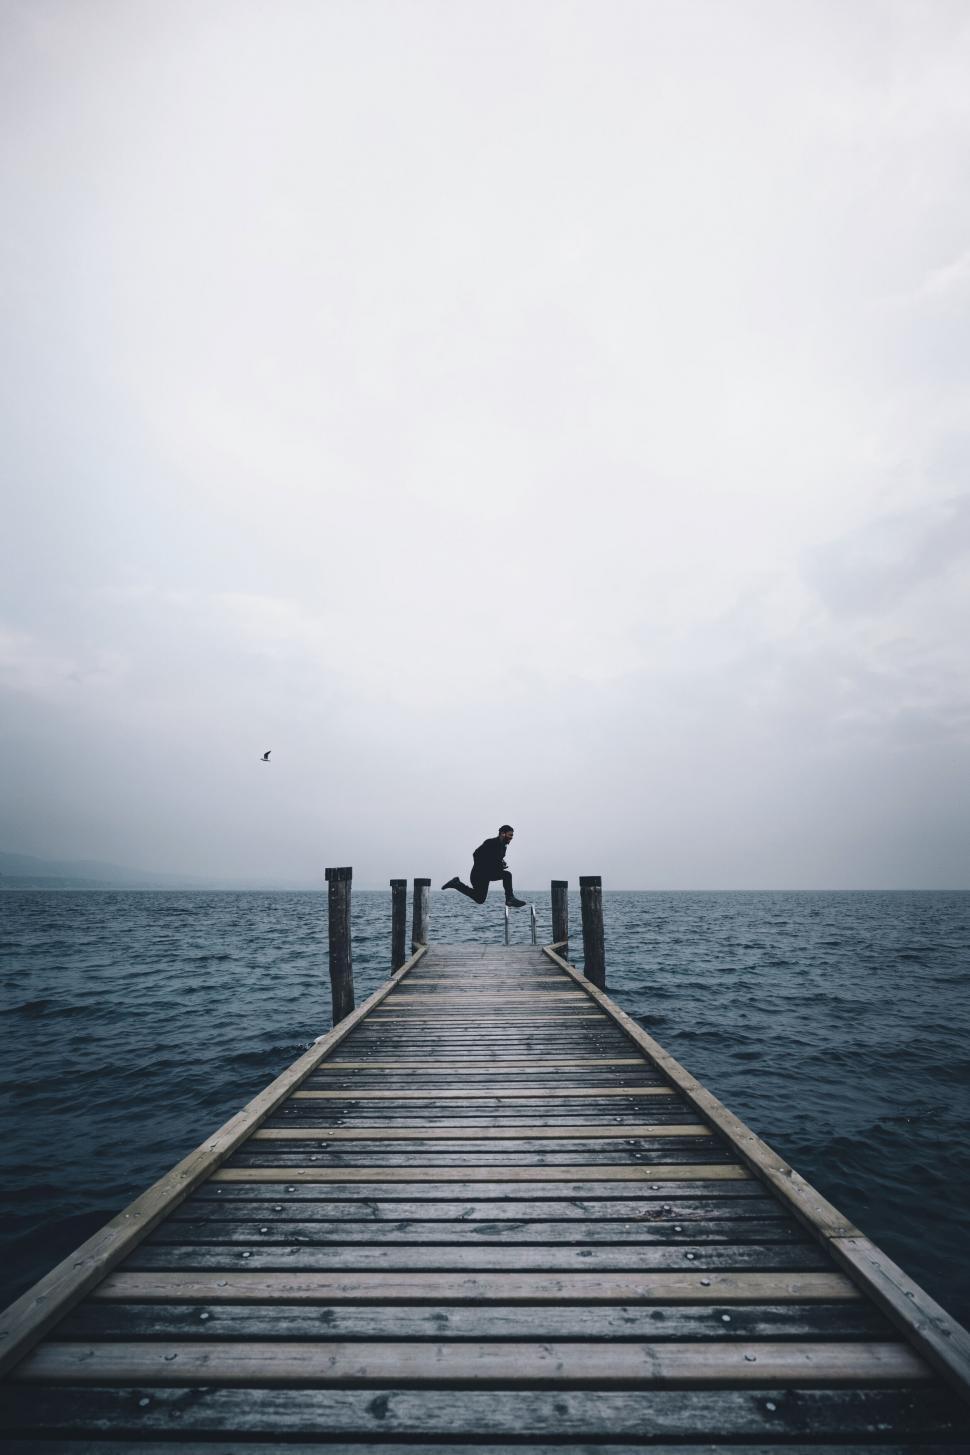 Free Image of A person jumping off a dock over water 